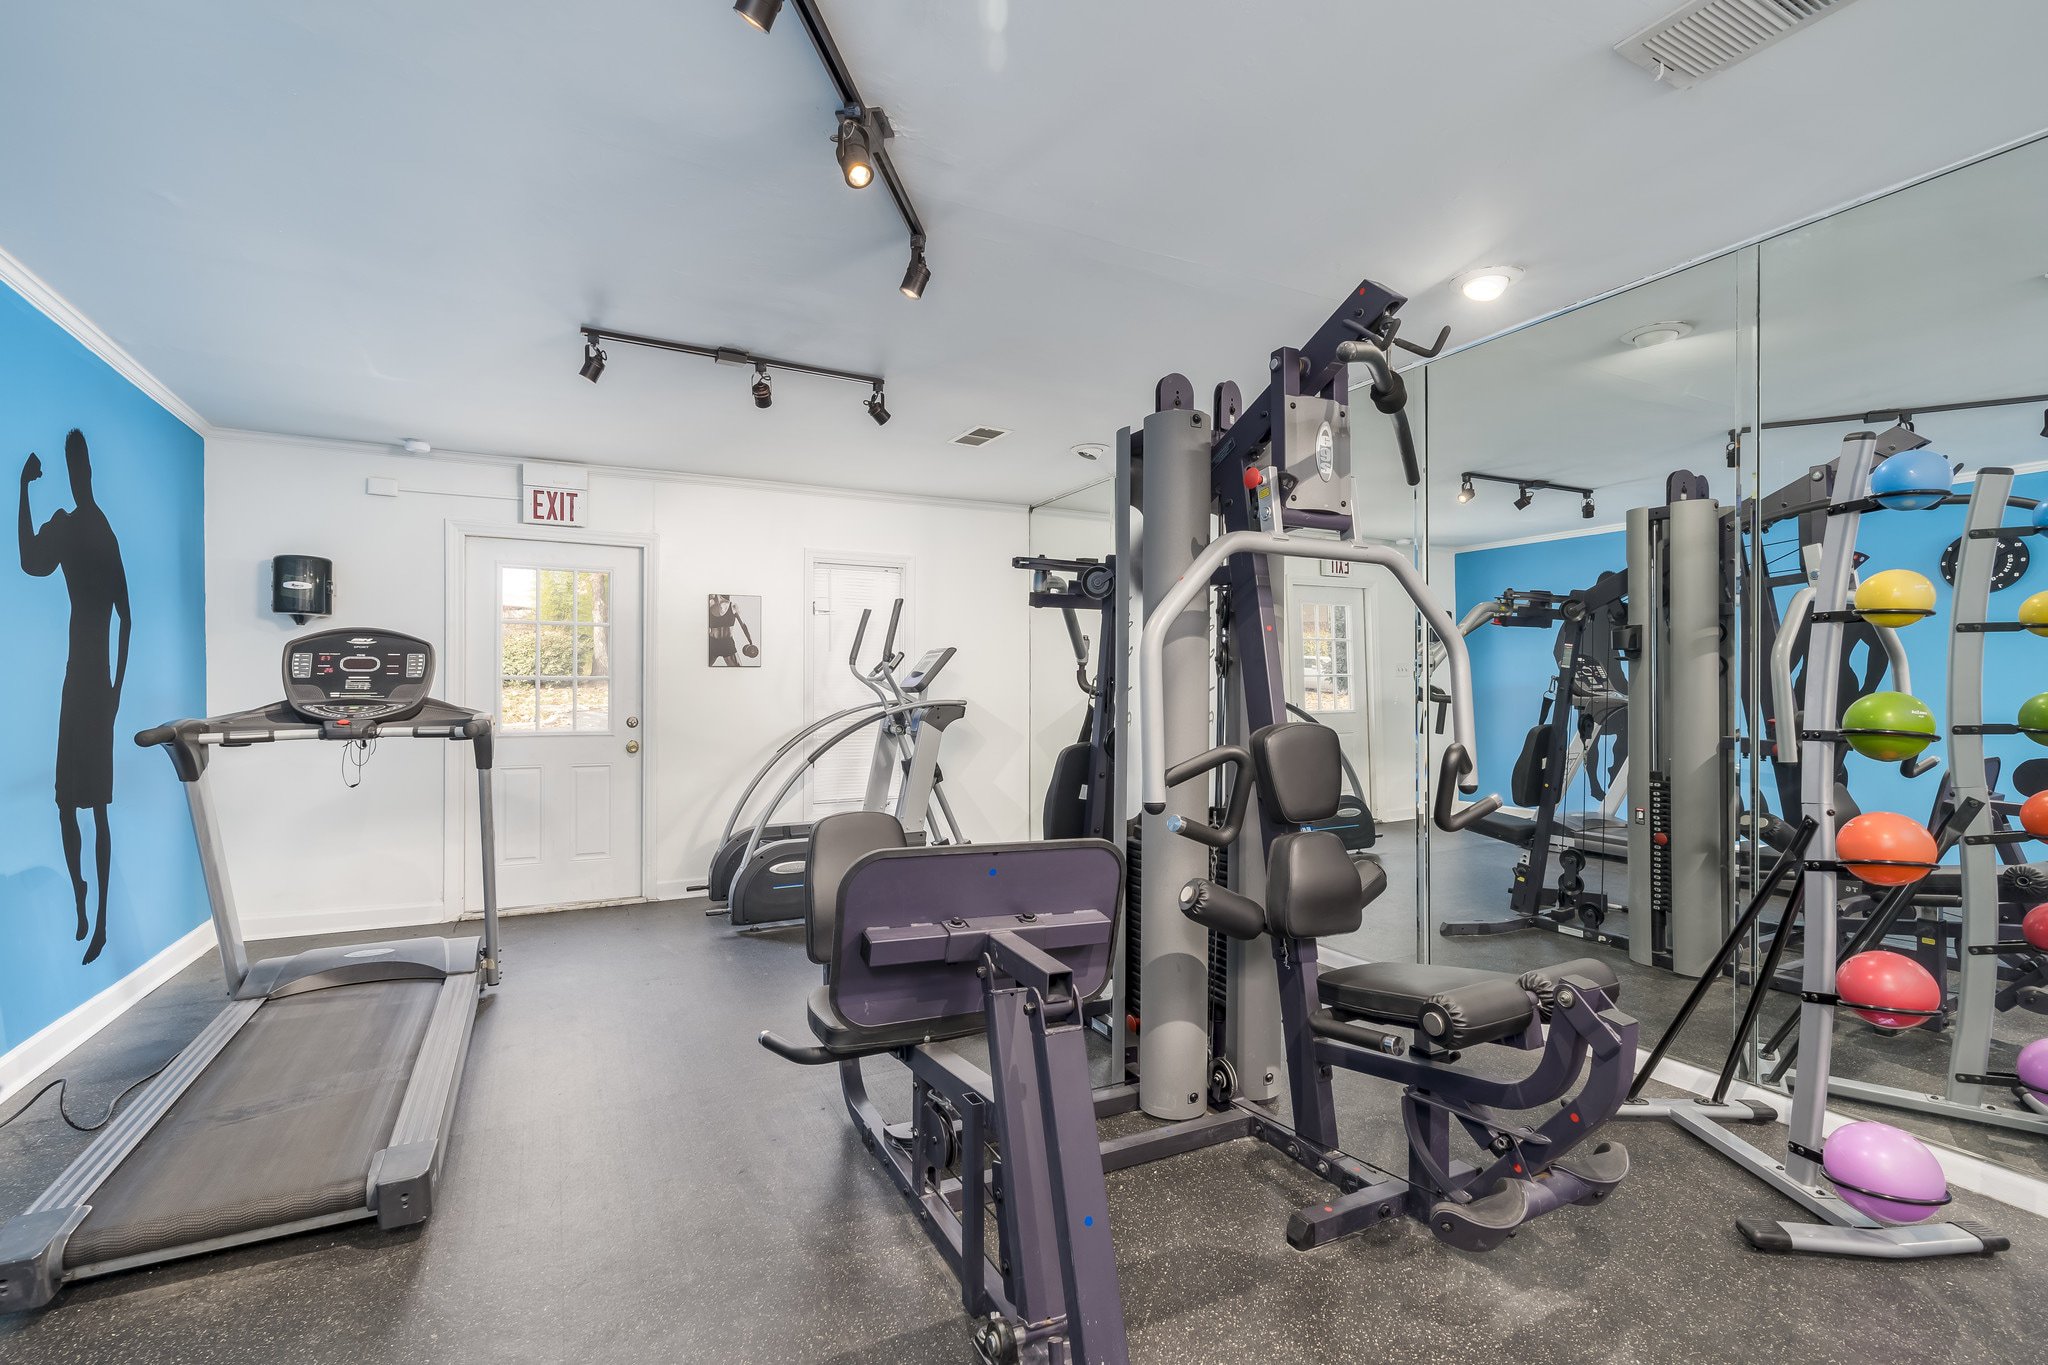 gym at Ashley Woods Apartments, located in the heart of Greensboro, North Carolina